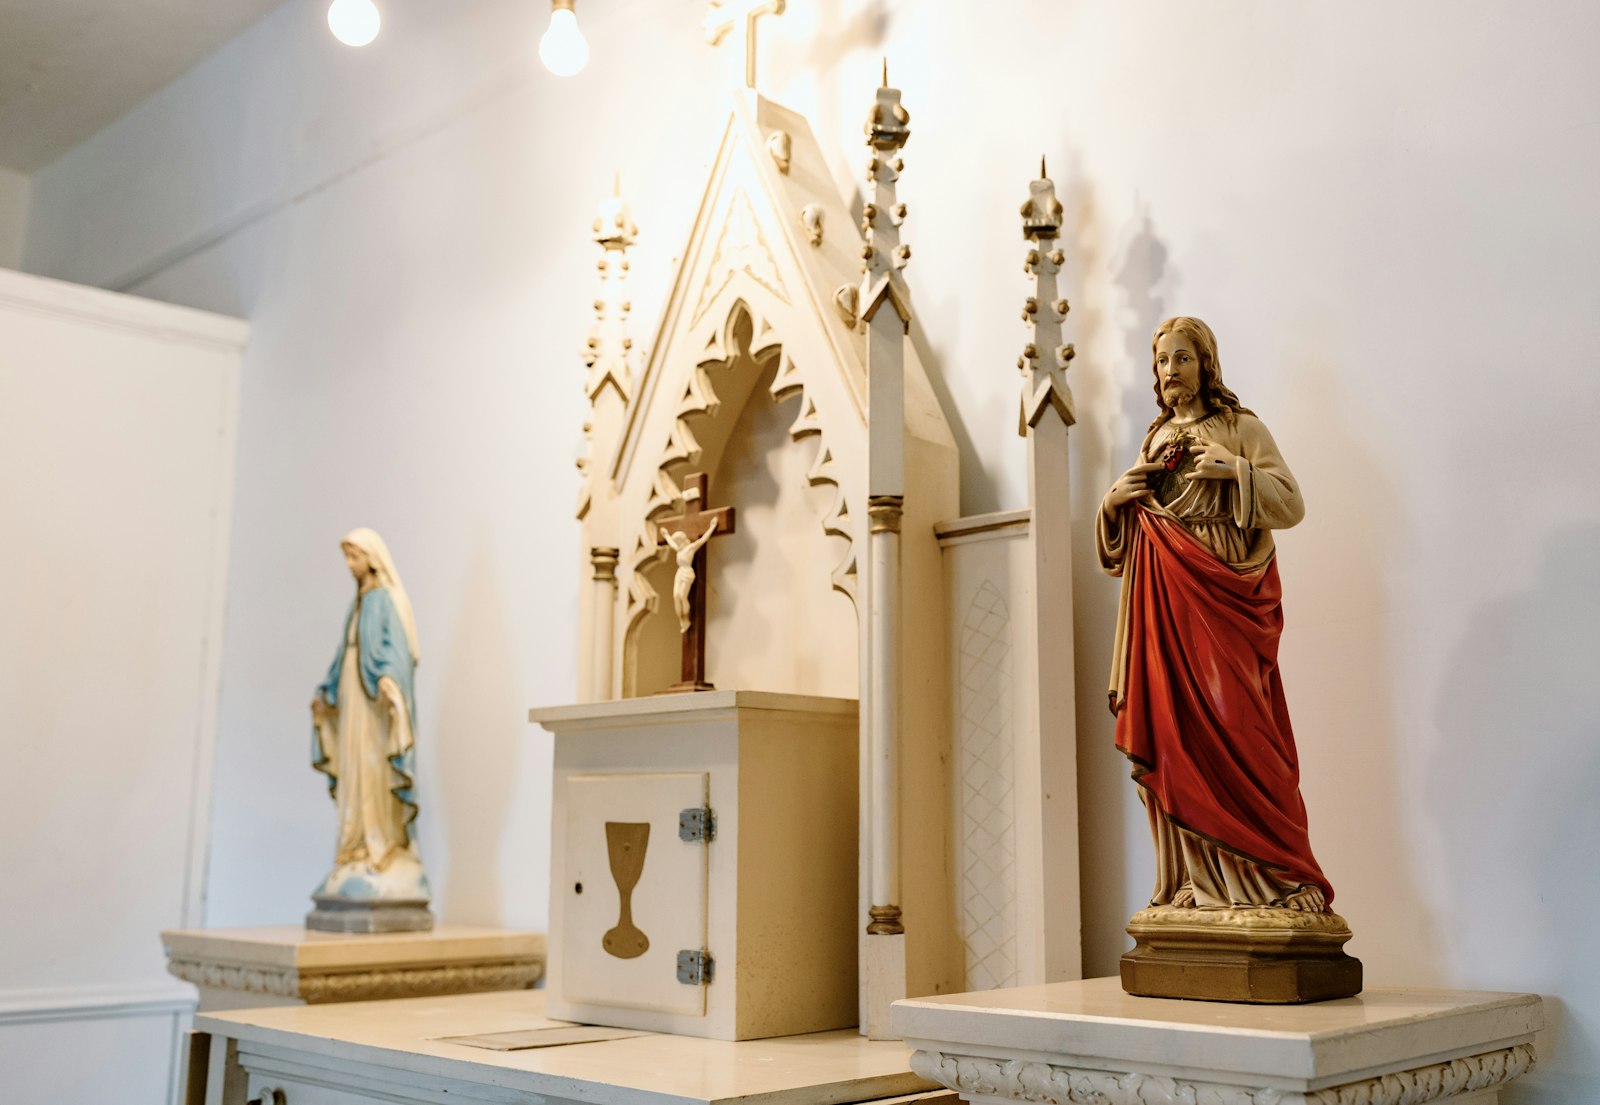 A small wooden tabernacle and statuary stand as a testament to the chapel's simplicity and humble faith, emblematic of the Irish settlers who first gathered there for Mass.